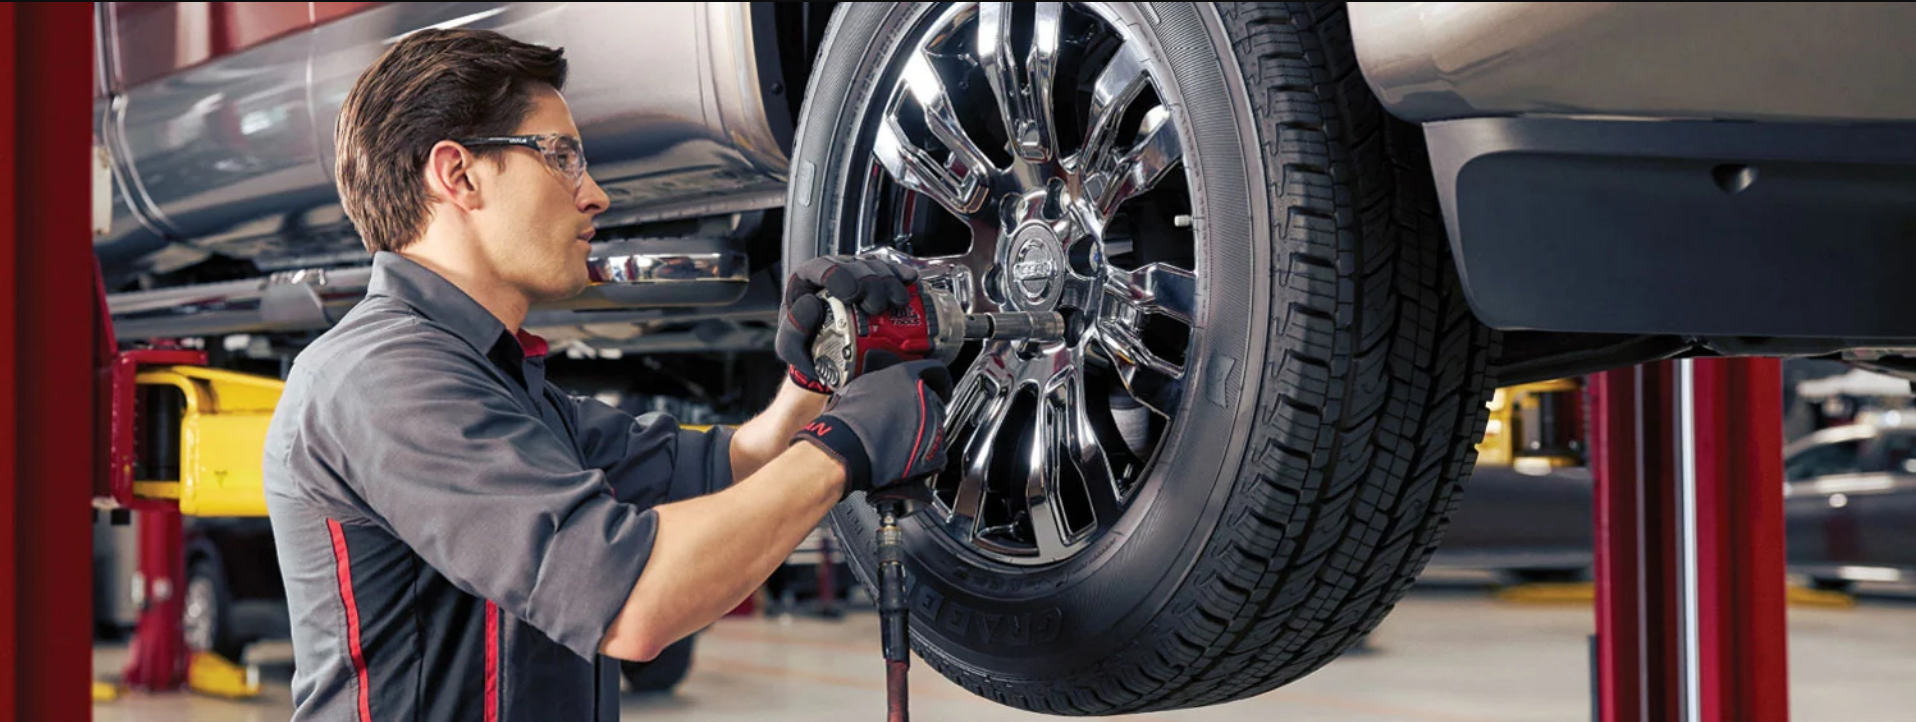 car mechanic servicing a vehicle tire in the shop